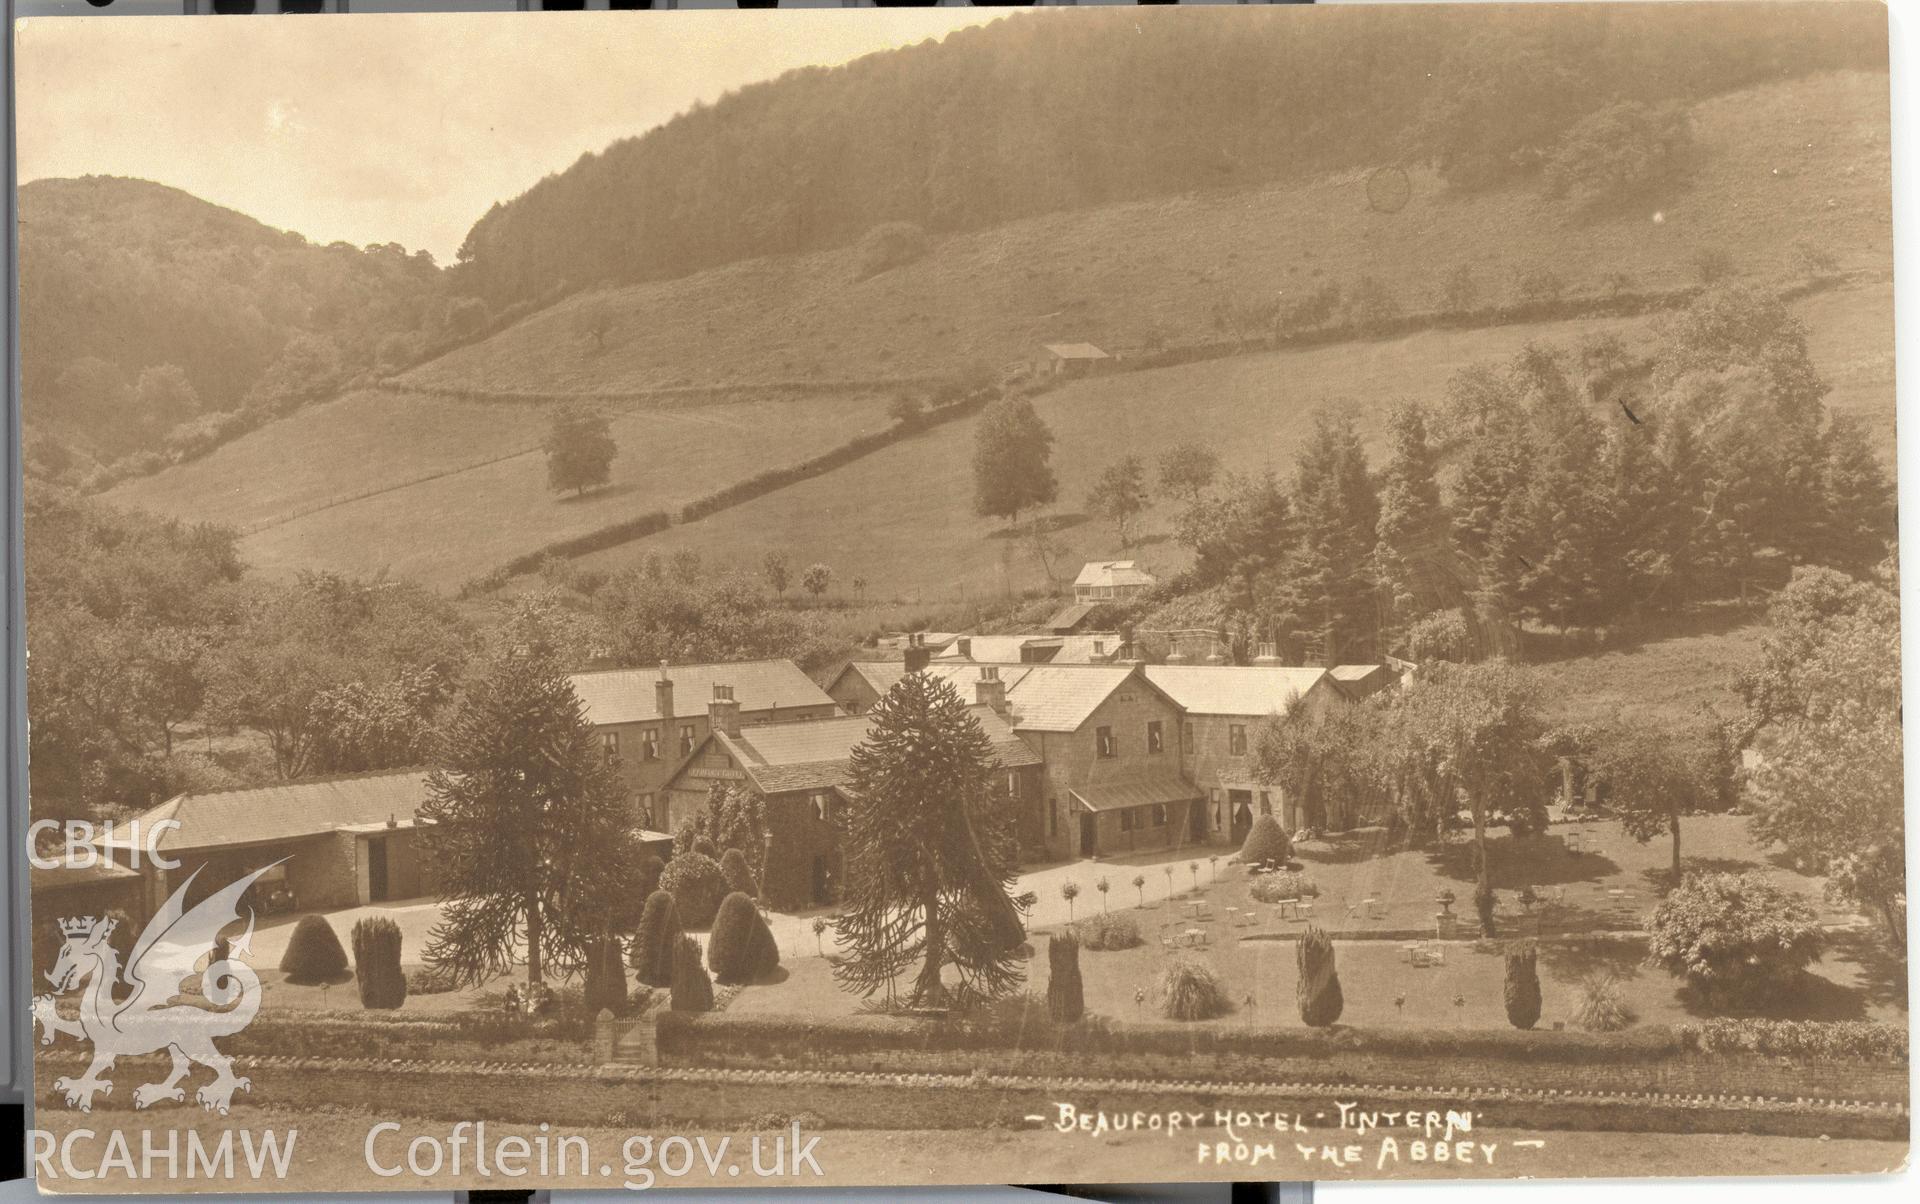 Digitised postcard image of Beaufort Arms Hotel, Tintern, W.A. Call, the County Studio, Monmouth. Produced by Parks and Gardens Data Services, from an original item in the Peter Davis Collection at Parks and Gardens UK. We hold only web-resolution images of this collection, suitable for viewing on screen and for research purposes only. We do not hold the original images, or publication quality scans.